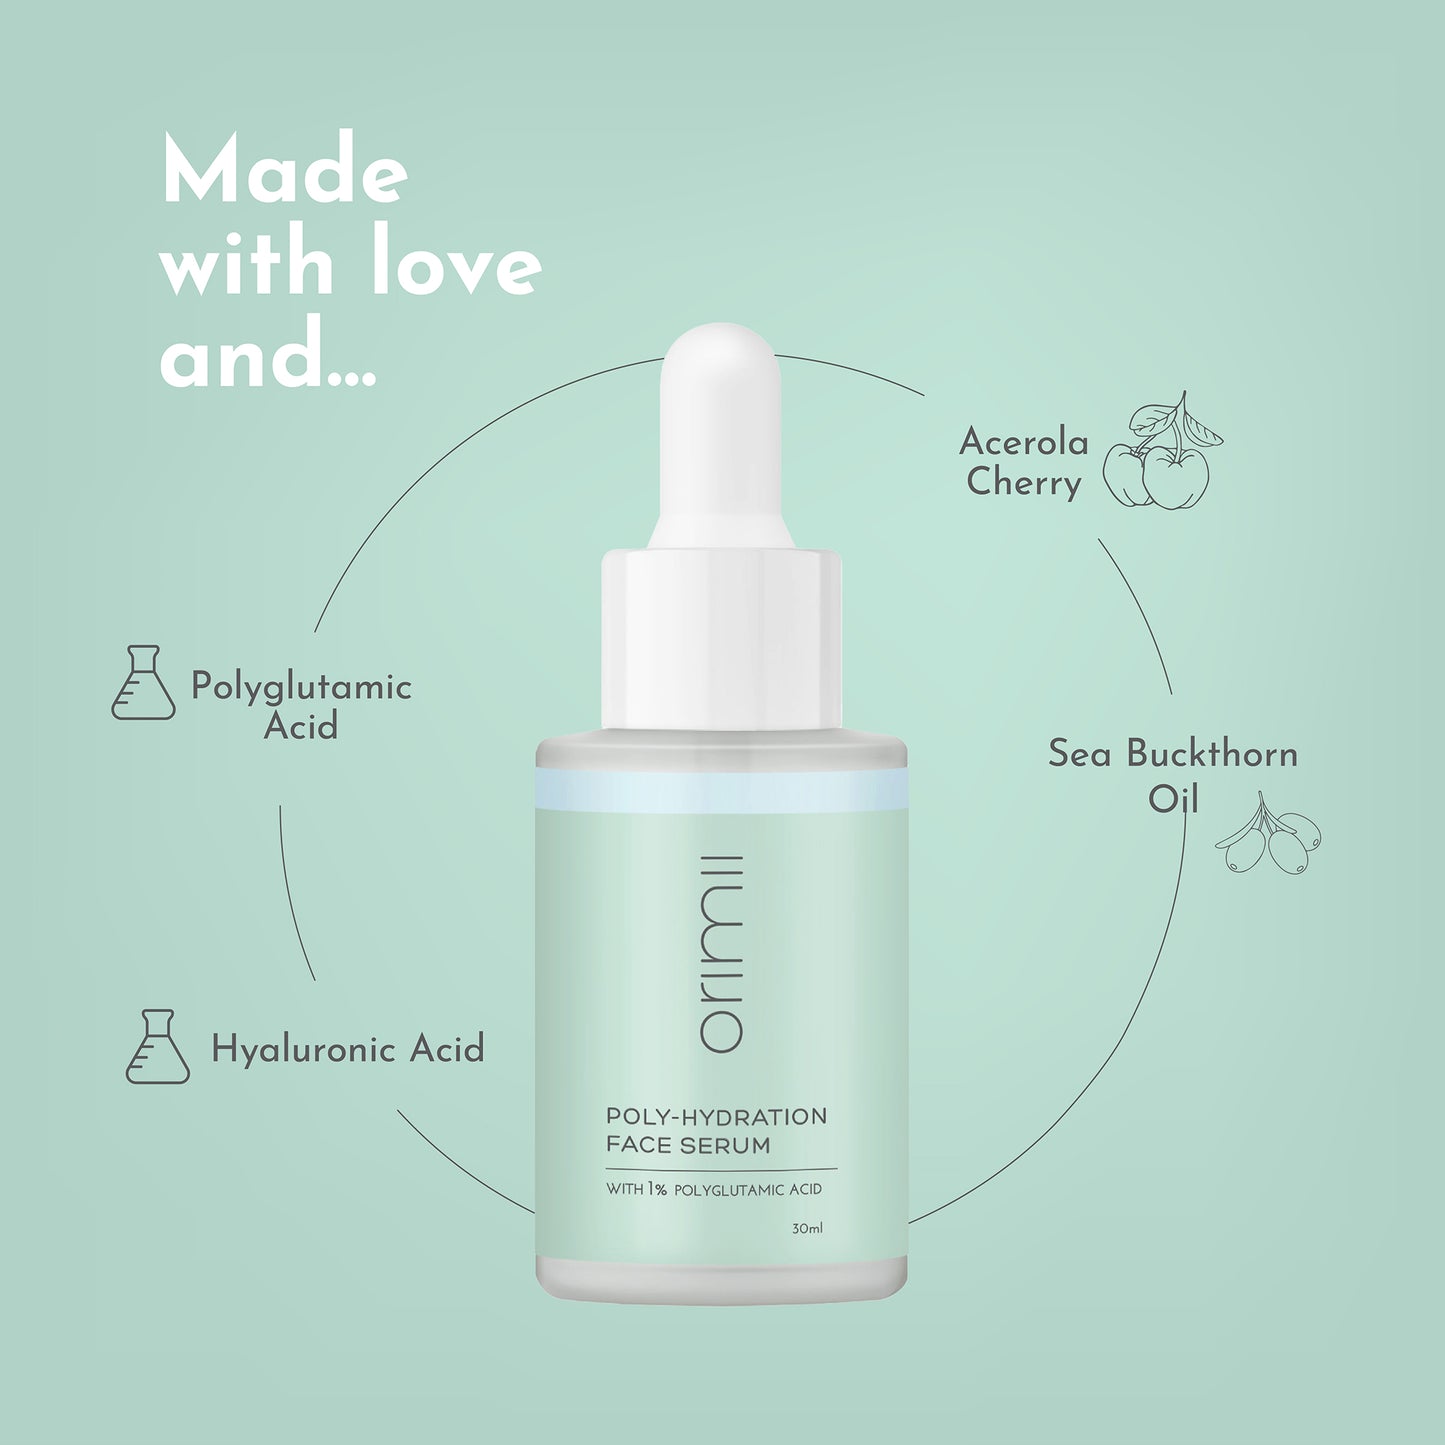 Poly-Hydration Face Serum